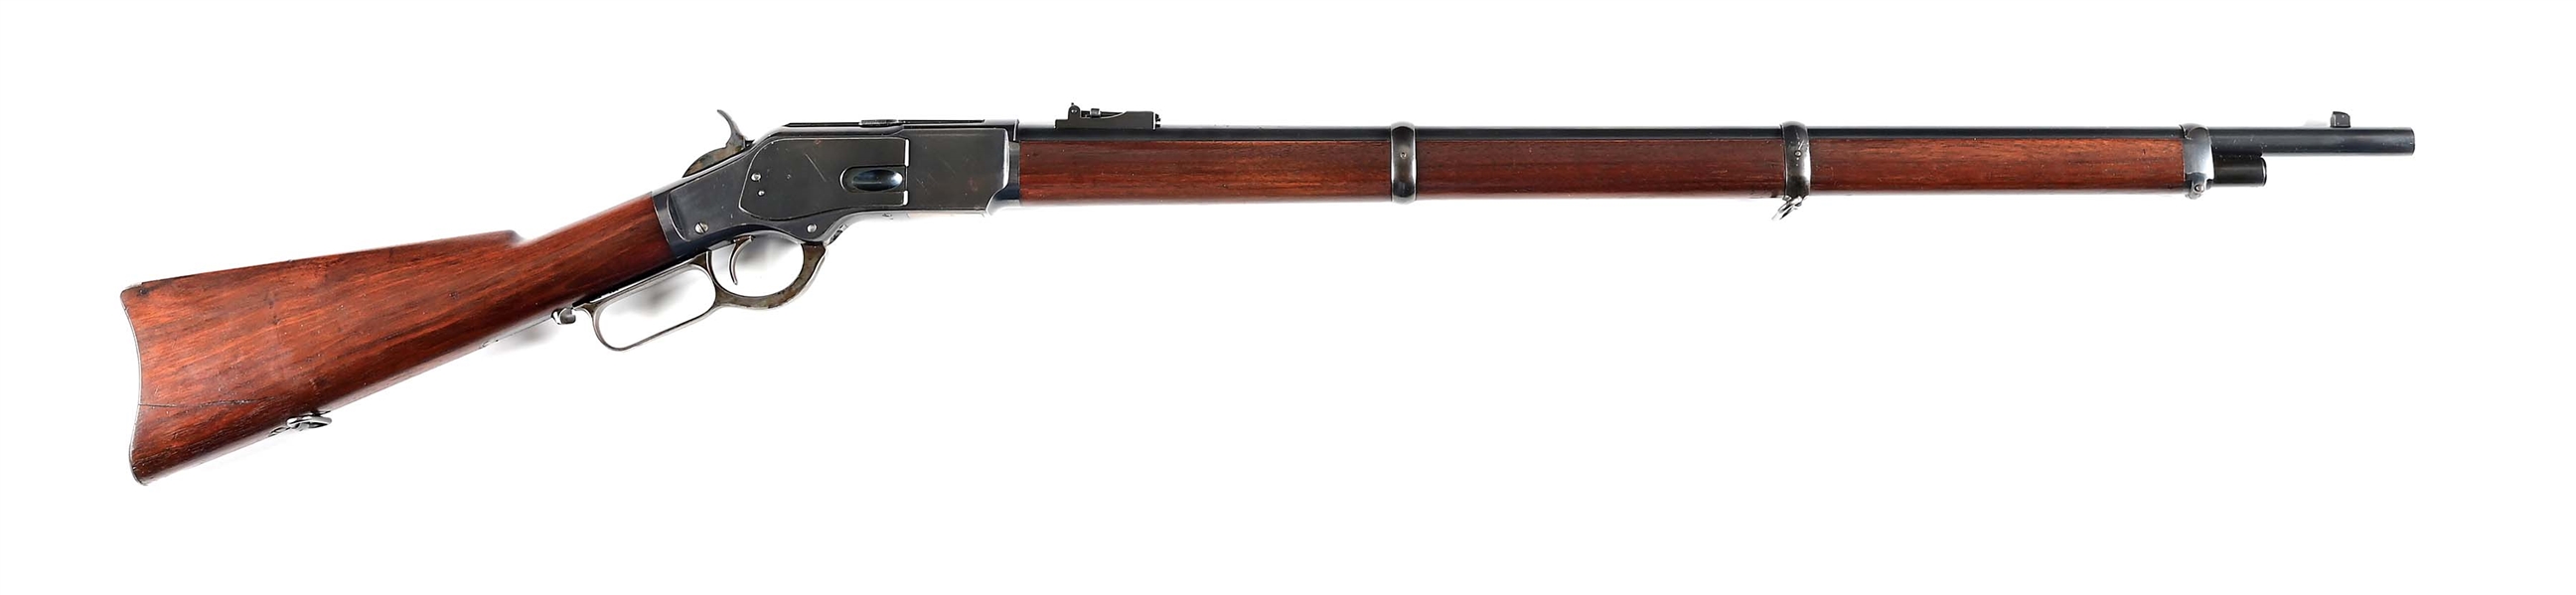 (C) HIGH CONDITION WINCHESTER MODEL 1873 MUSKET.